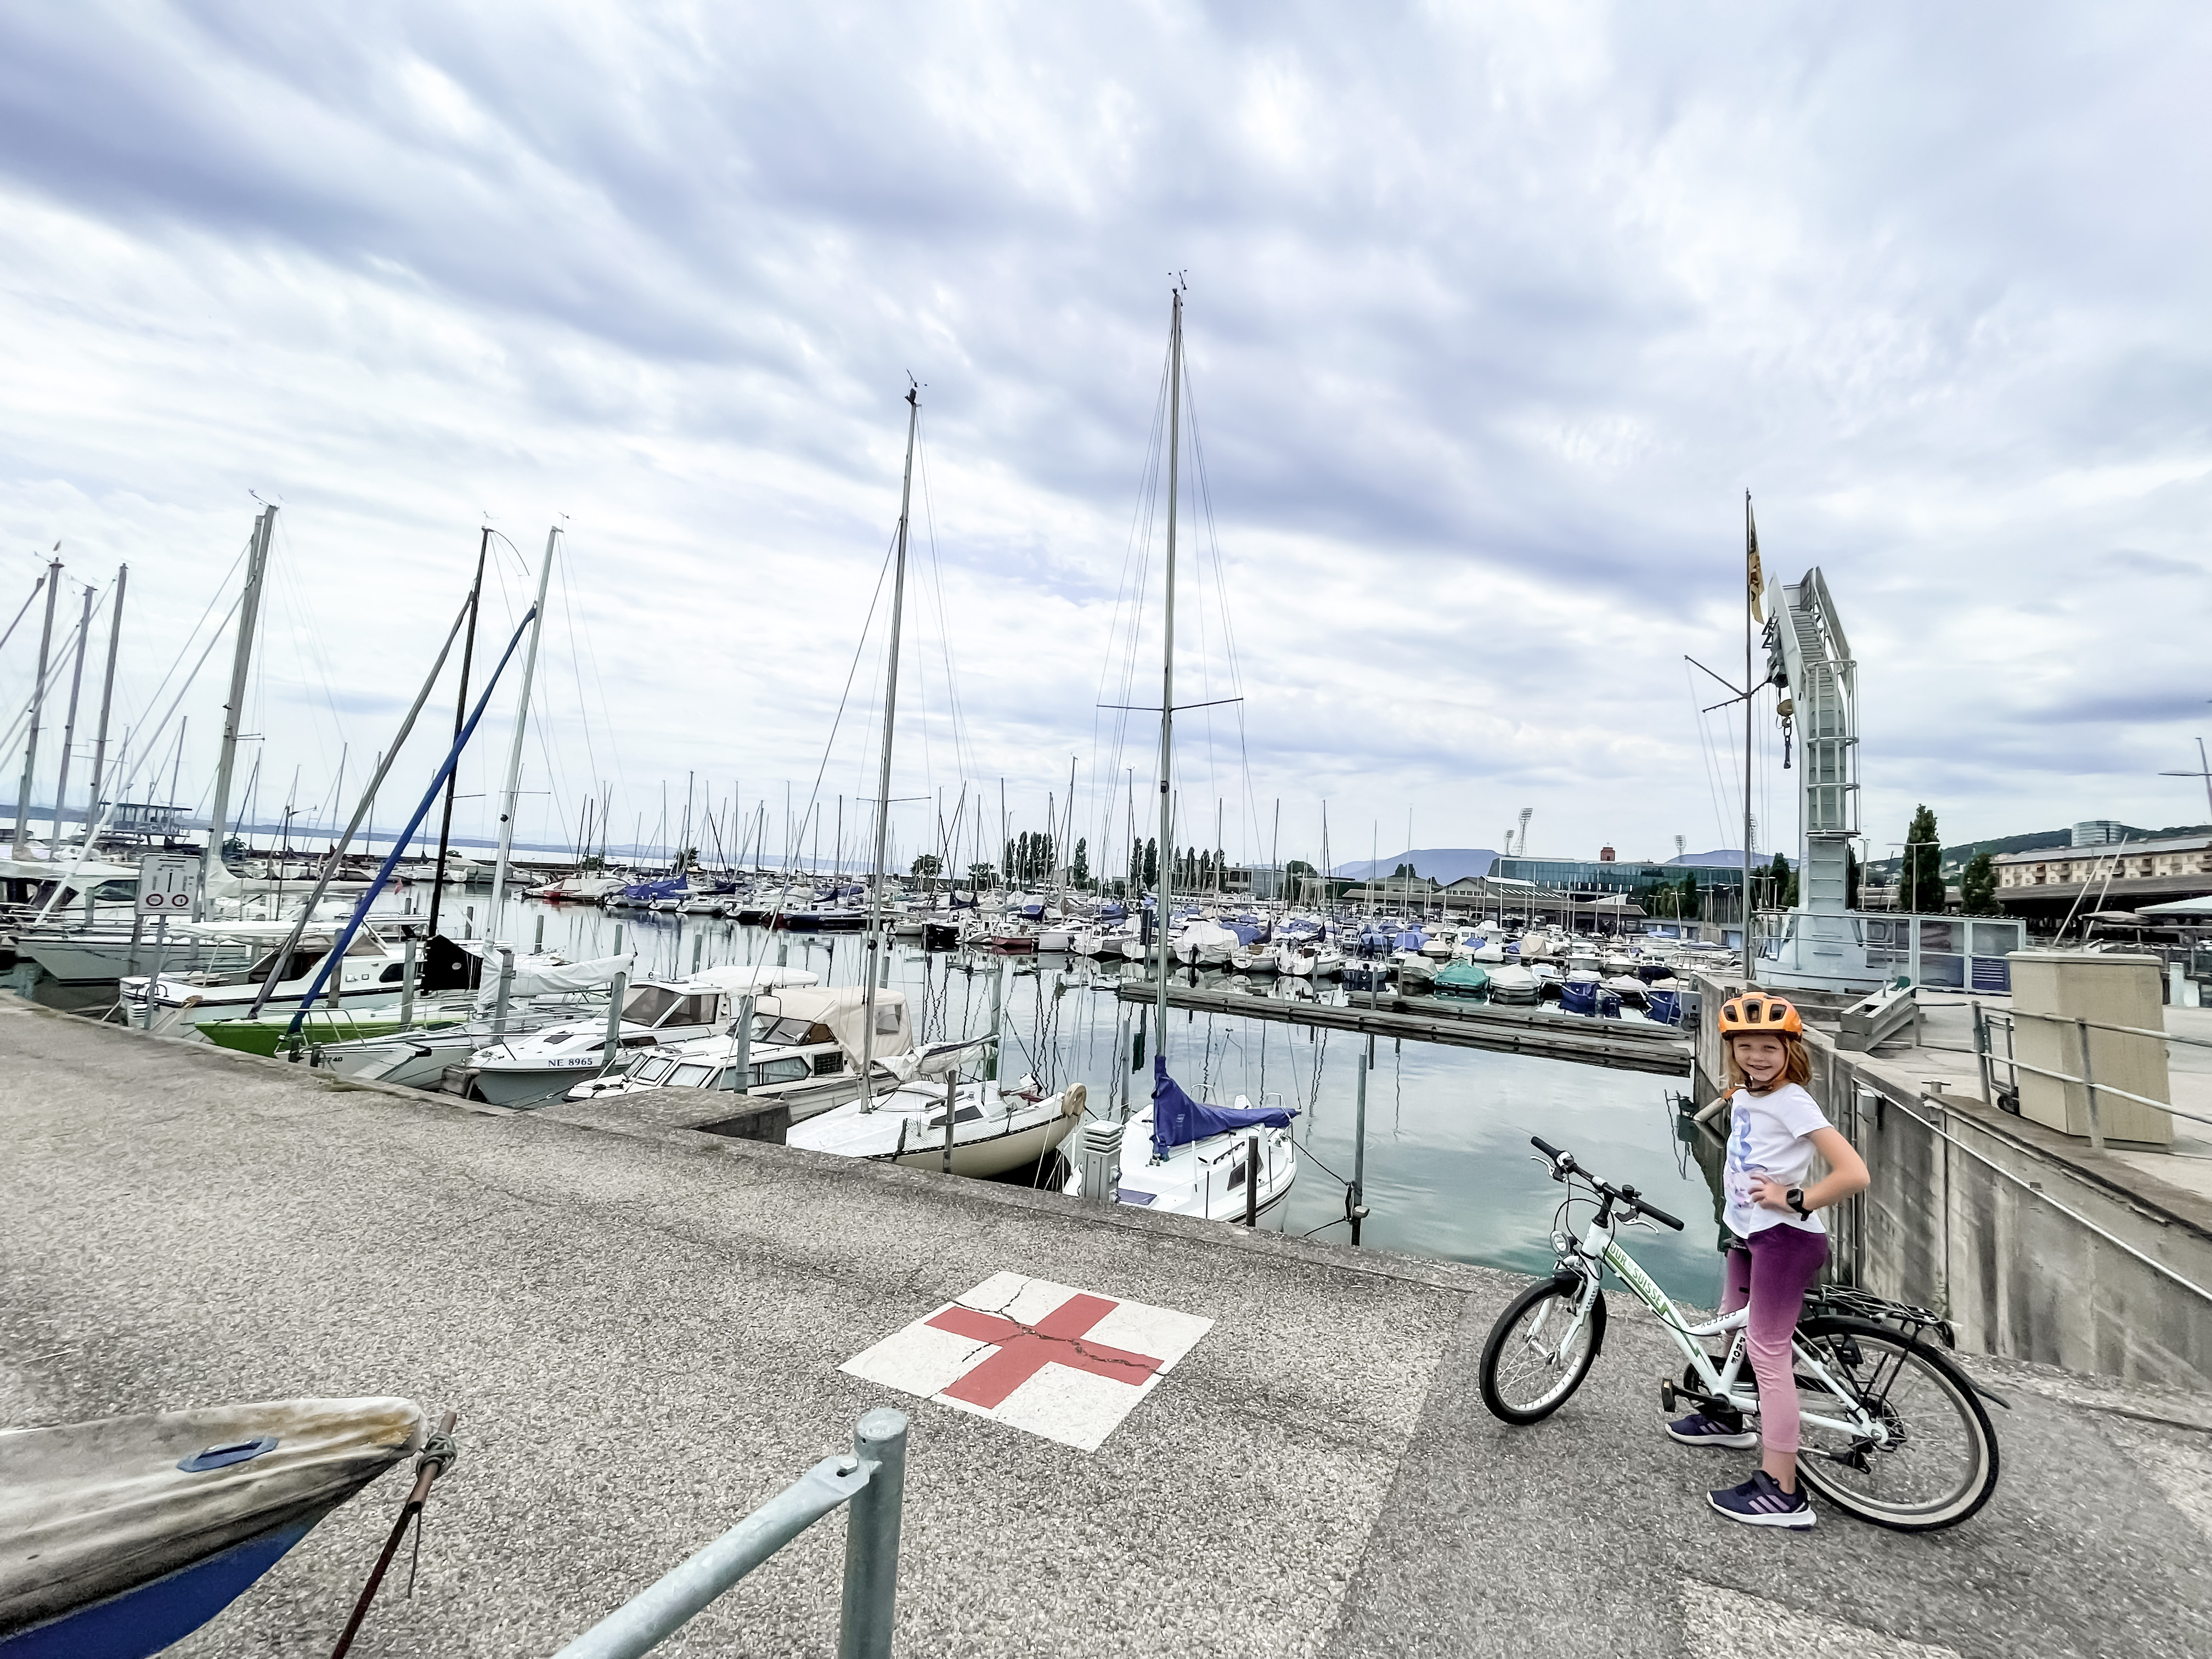 Bike Riding - What to do in Neuchâtel with children?